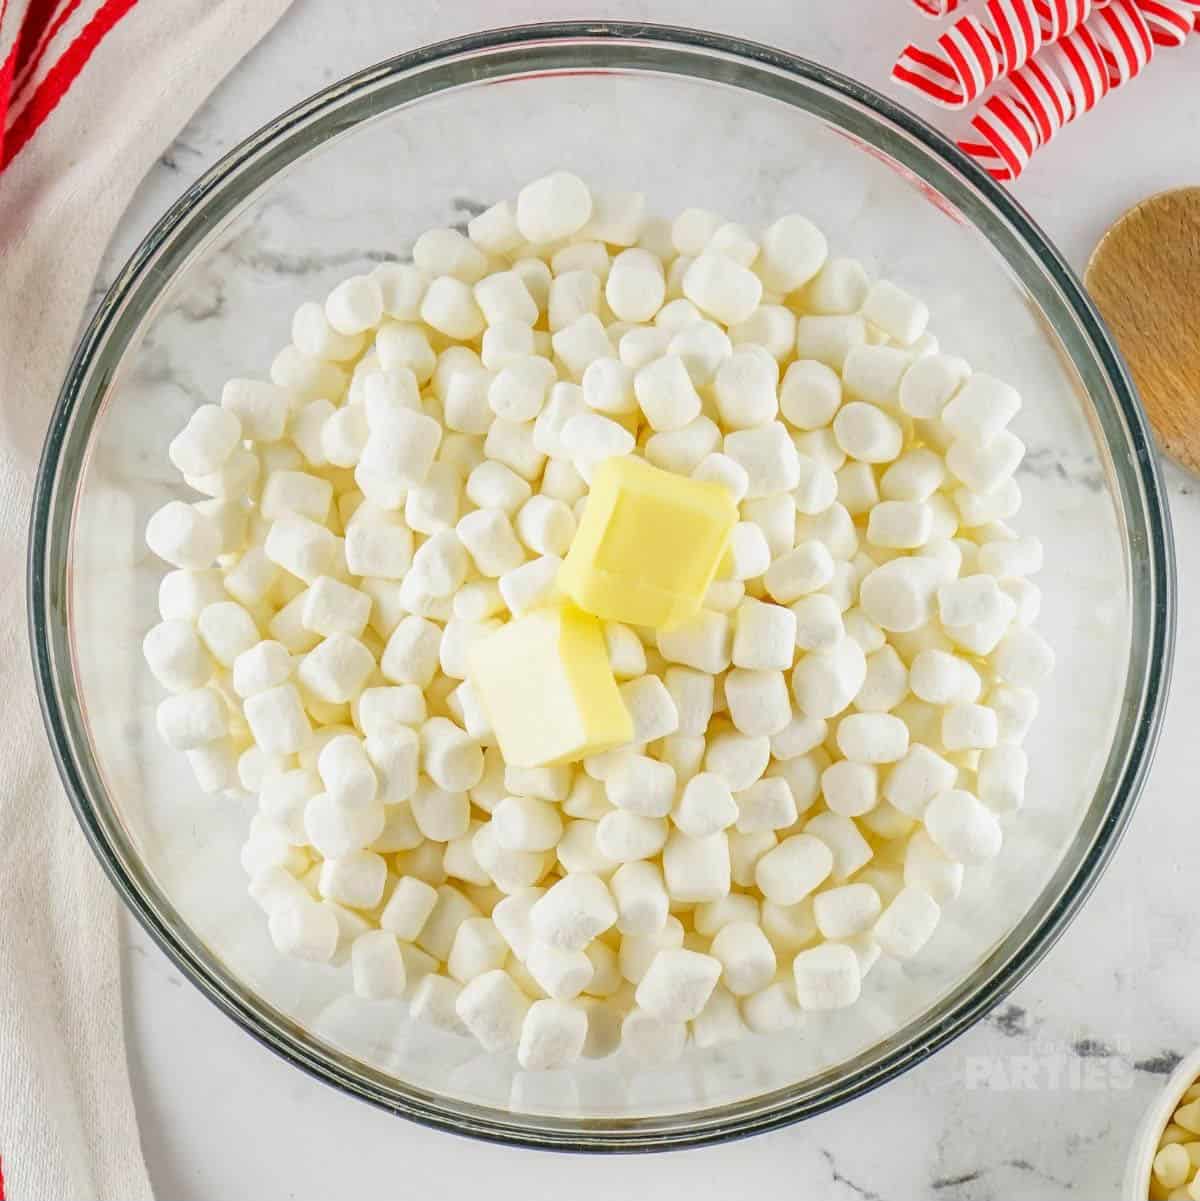 Mini marshmallows and butter cubes in a glass bowl.